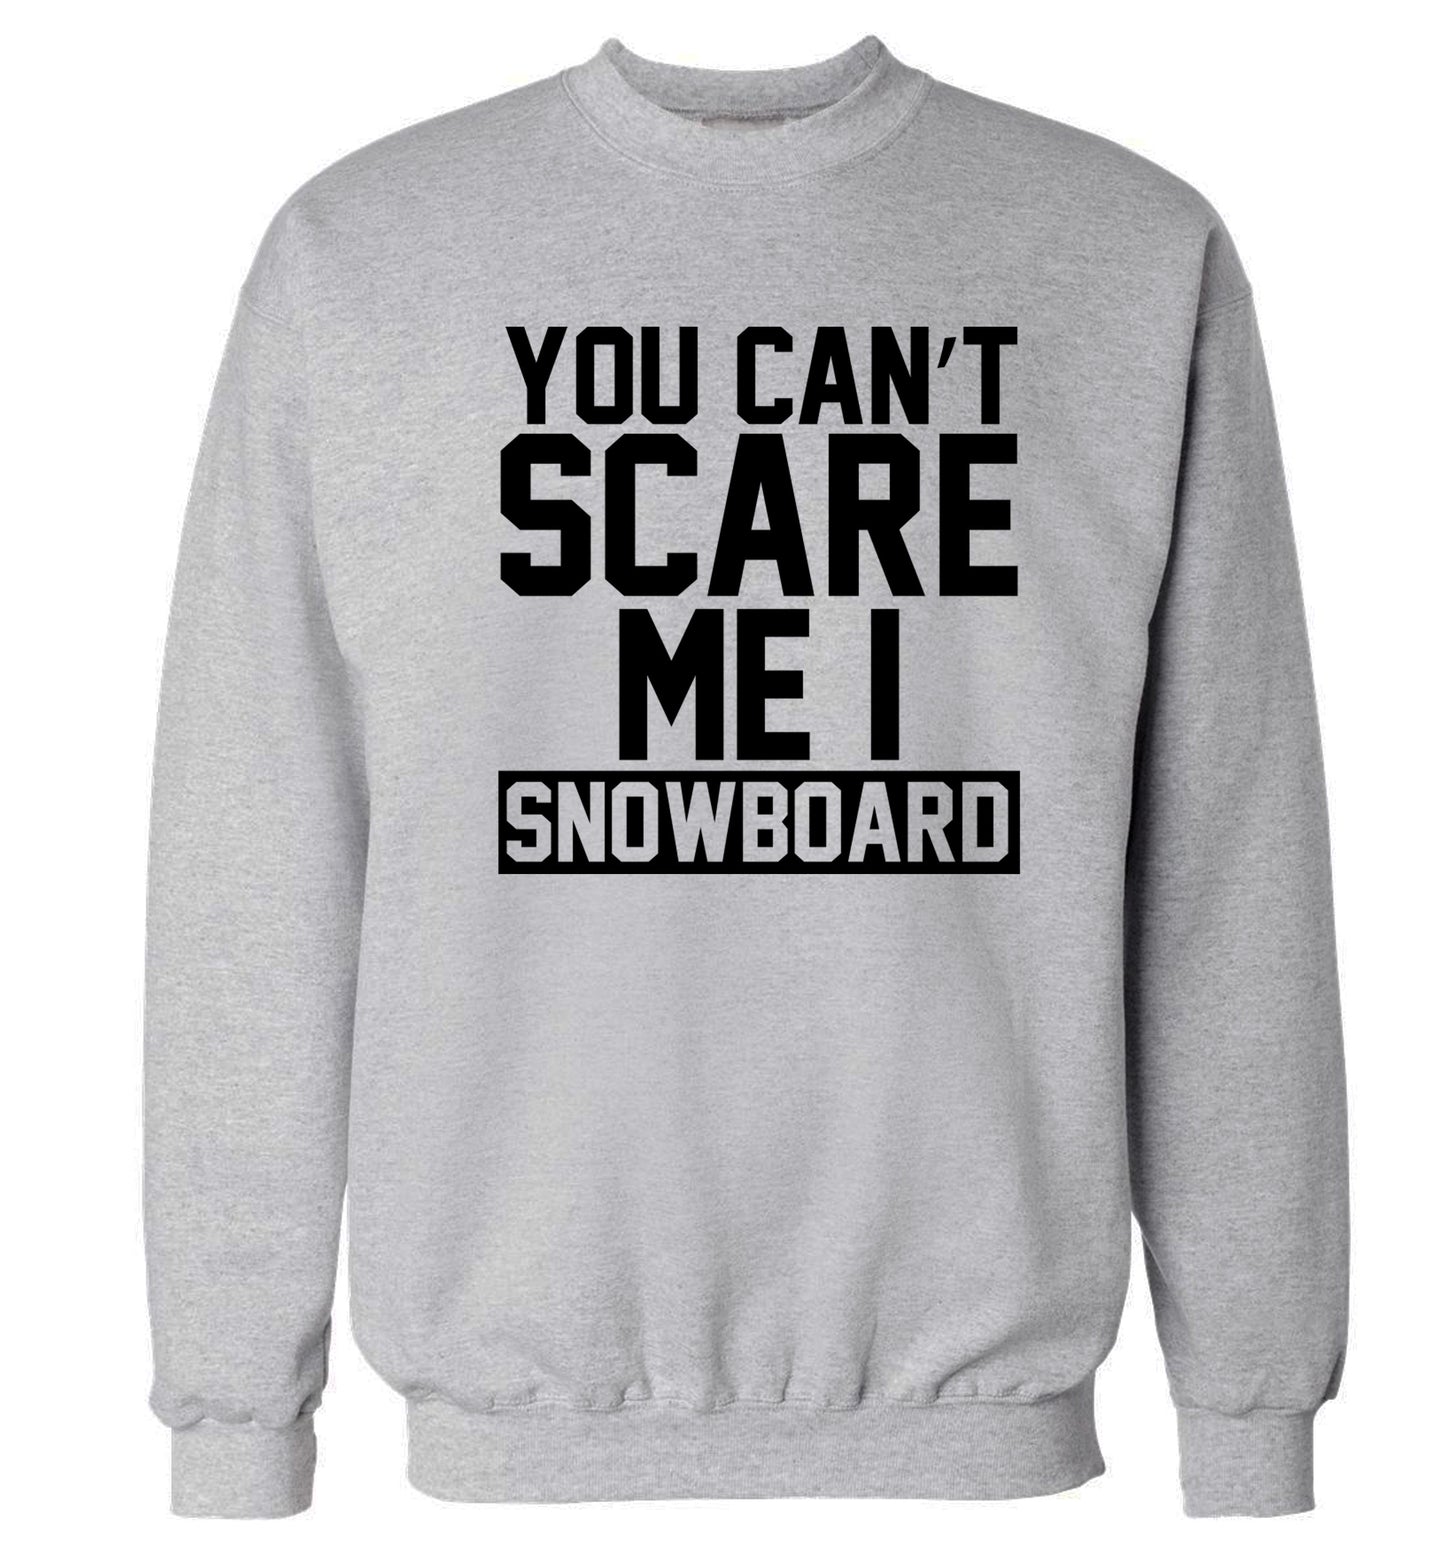 You can't scare me I snowboard Adult's unisex grey Sweater 2XL